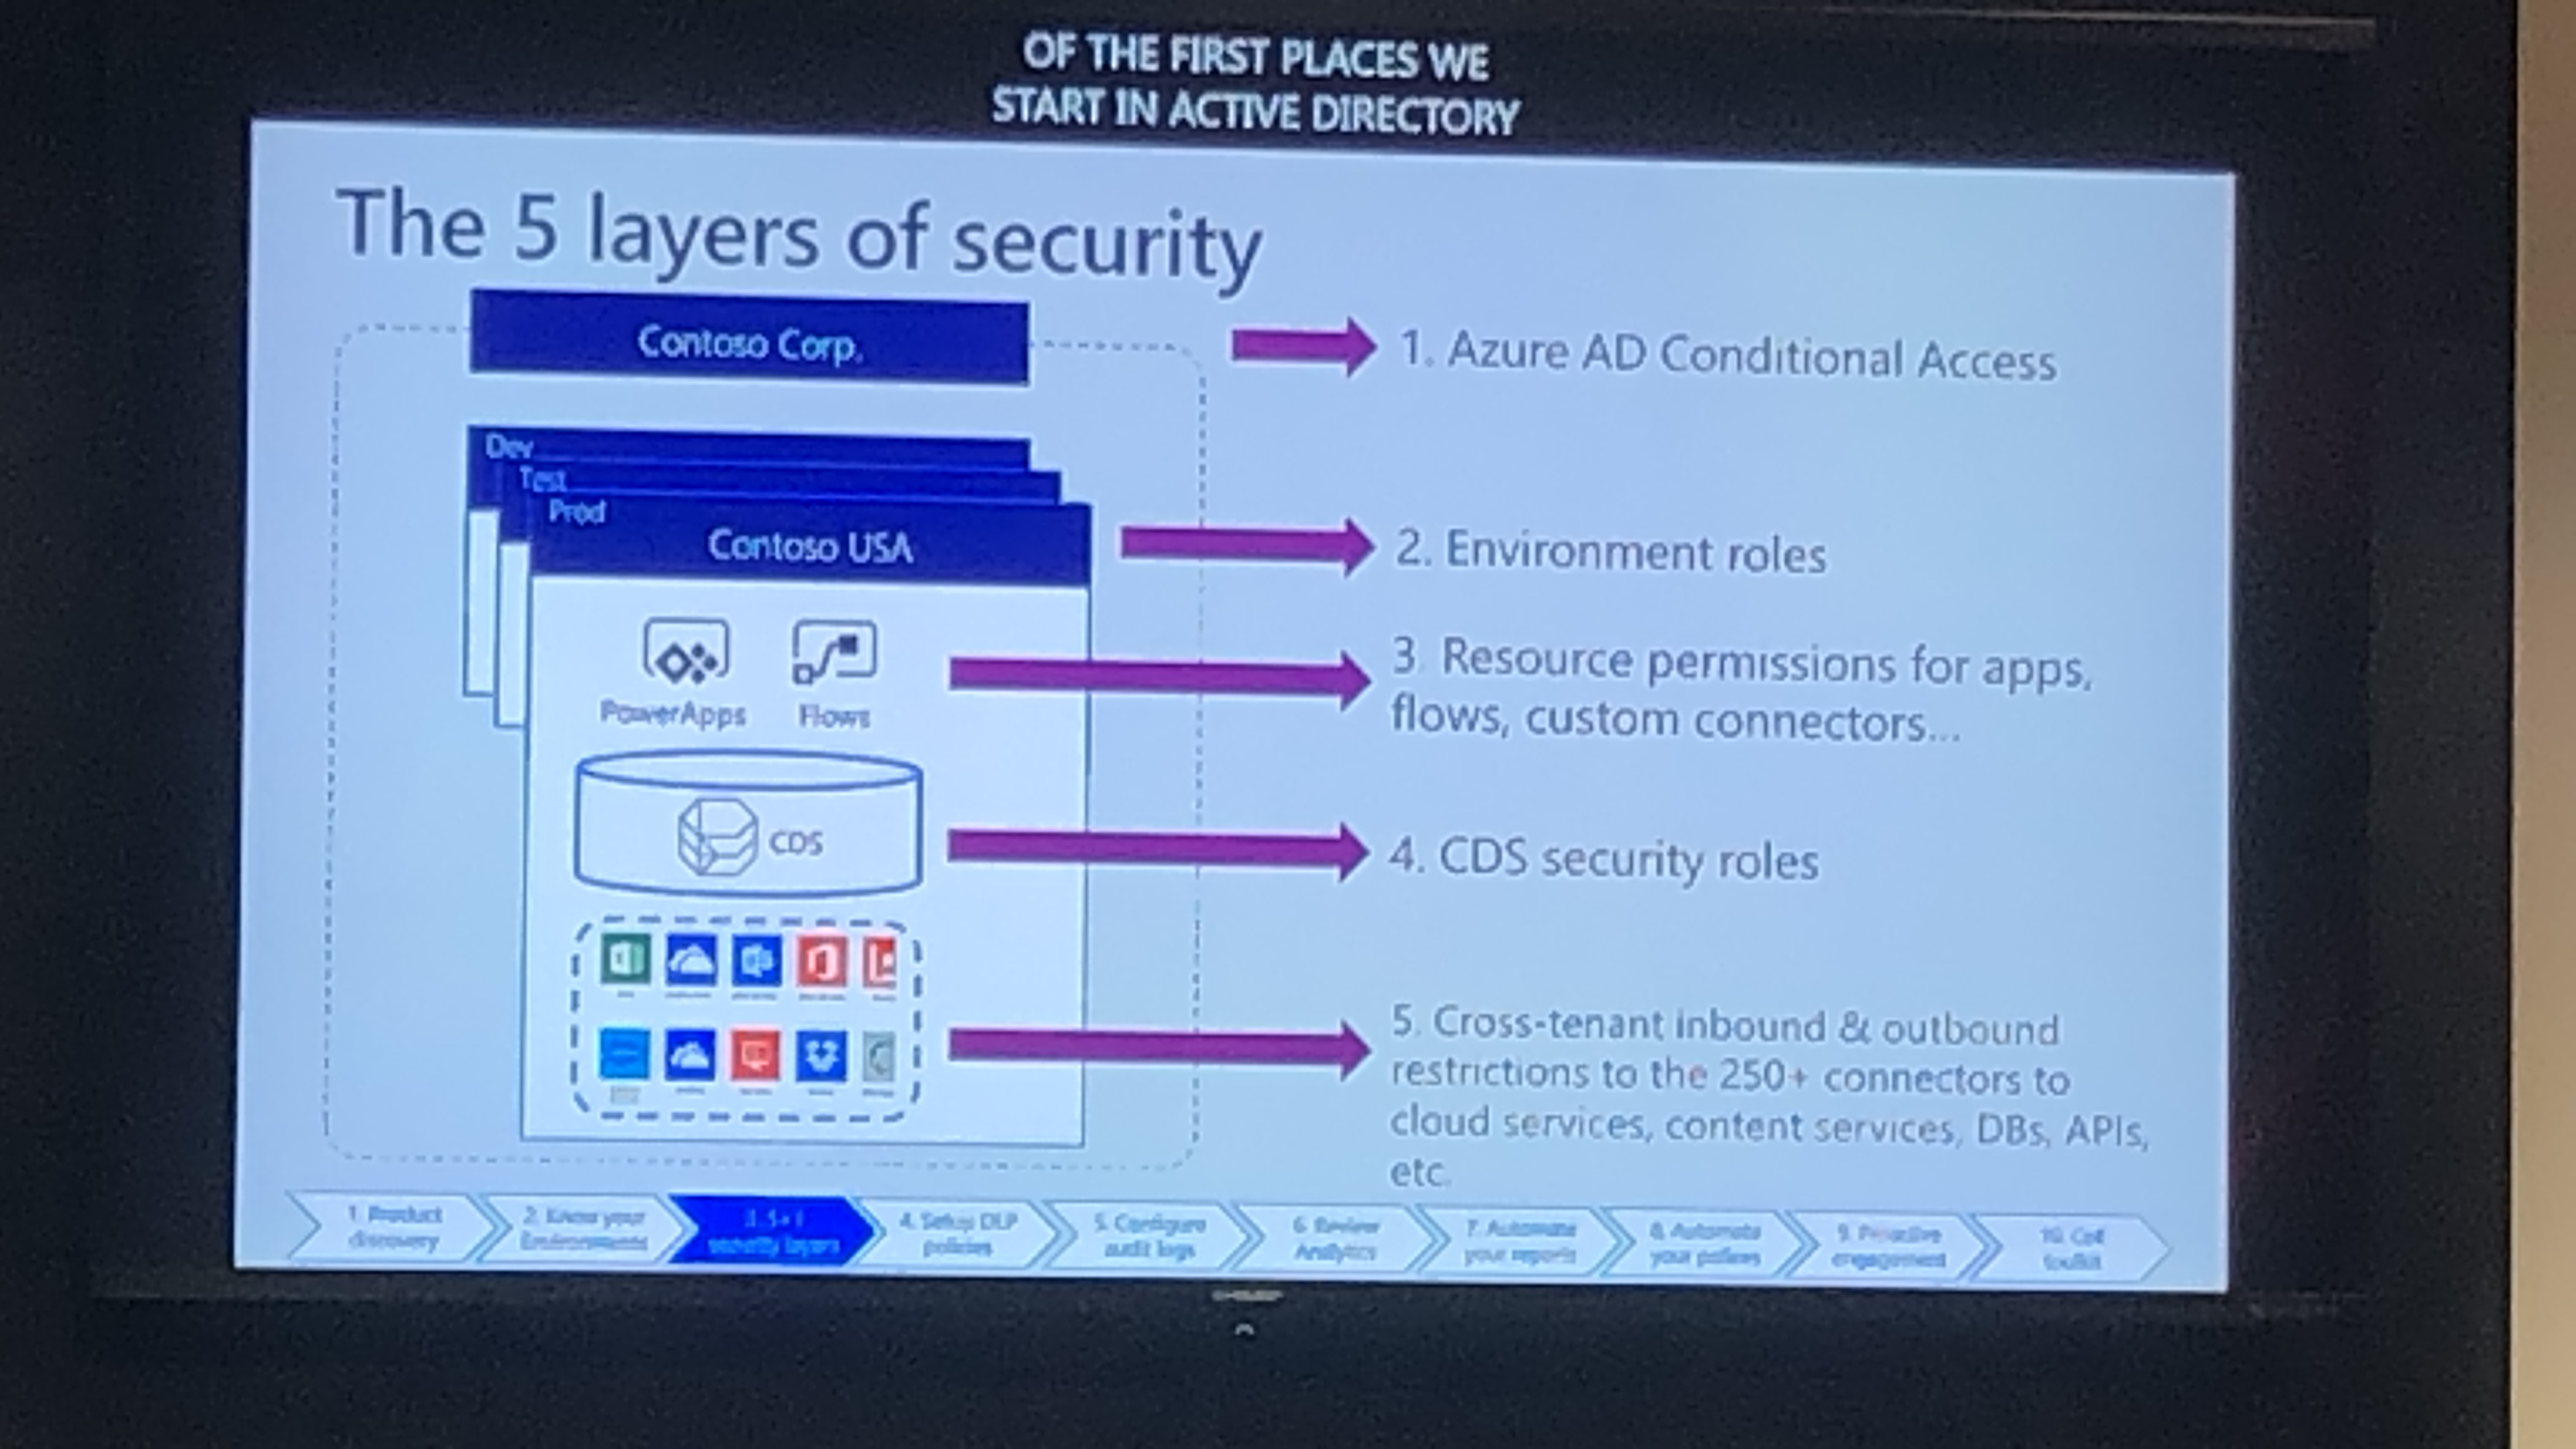 Image of the 5 layers of security in Power Platform